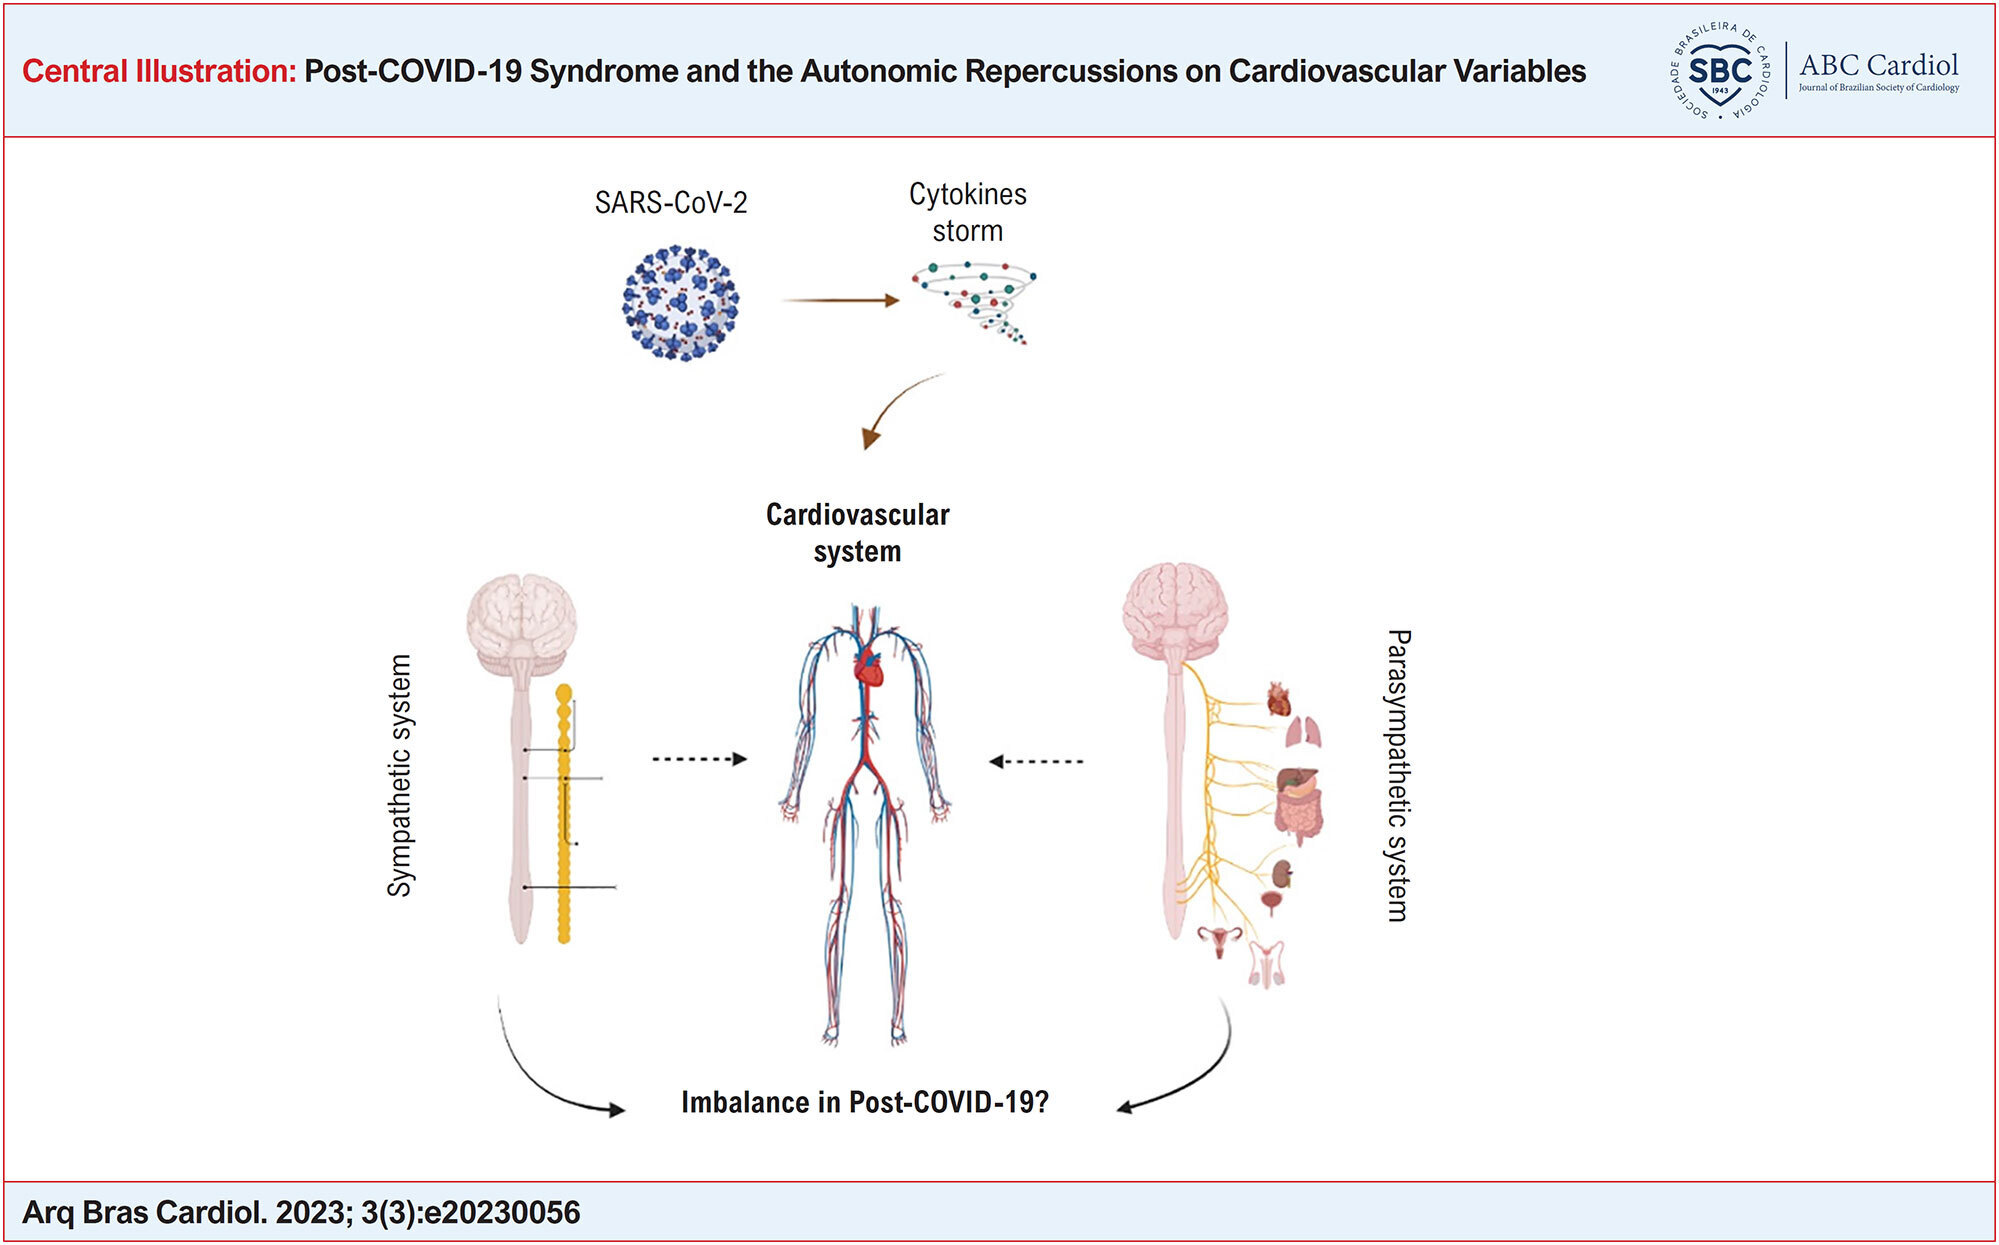 Post-COVID-19 Syndrome and the Autonomic Repercussions on Cardiovascular Variables